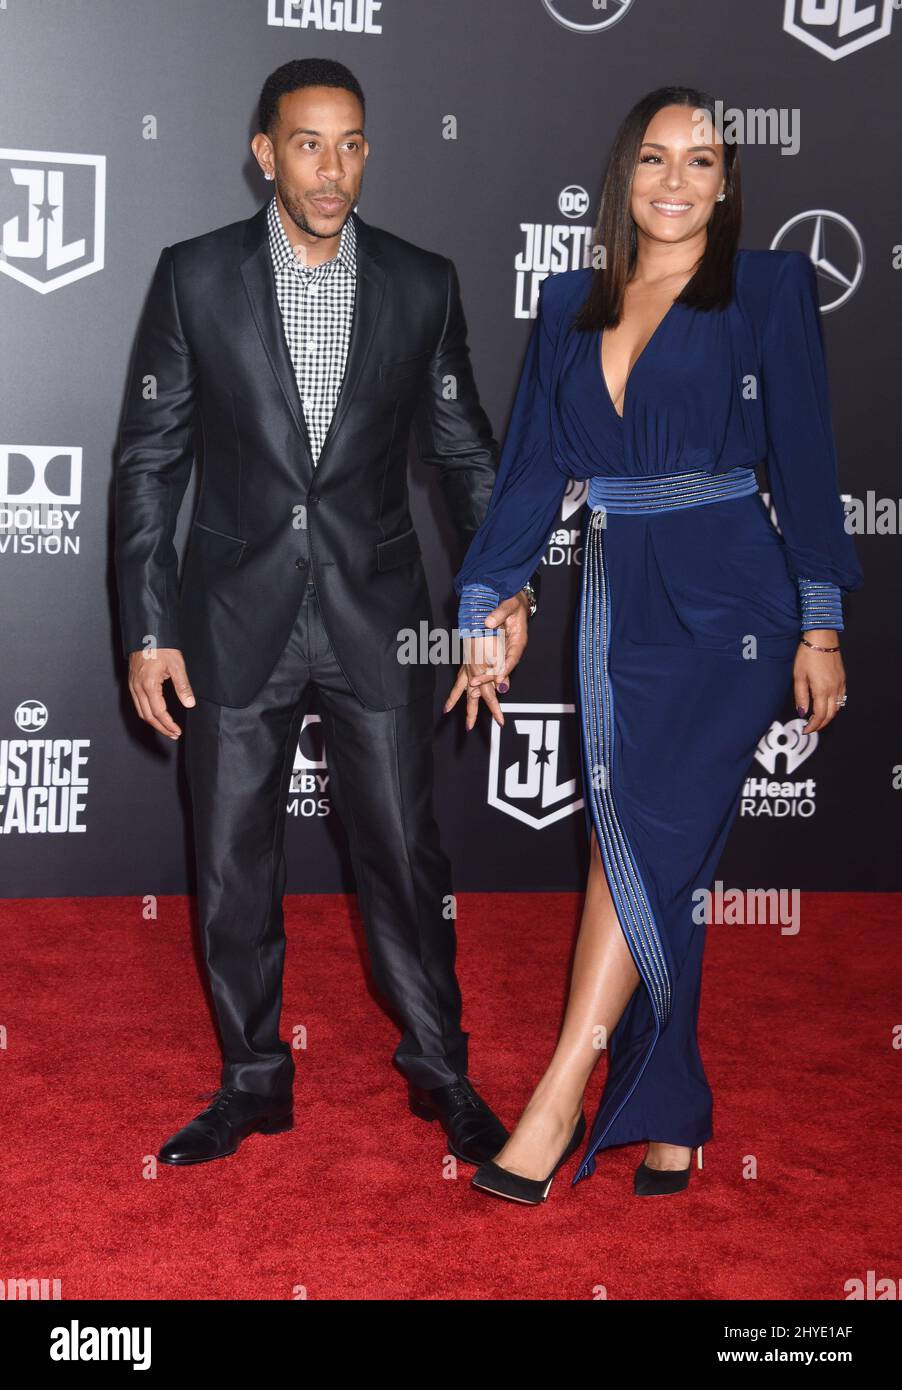 Chris Bridges, Ludacris and Eudoxie Mbouguiyengue attending the world premiere of Justice League held at the Dolby Theatre in Hollywood, California Stock Photo